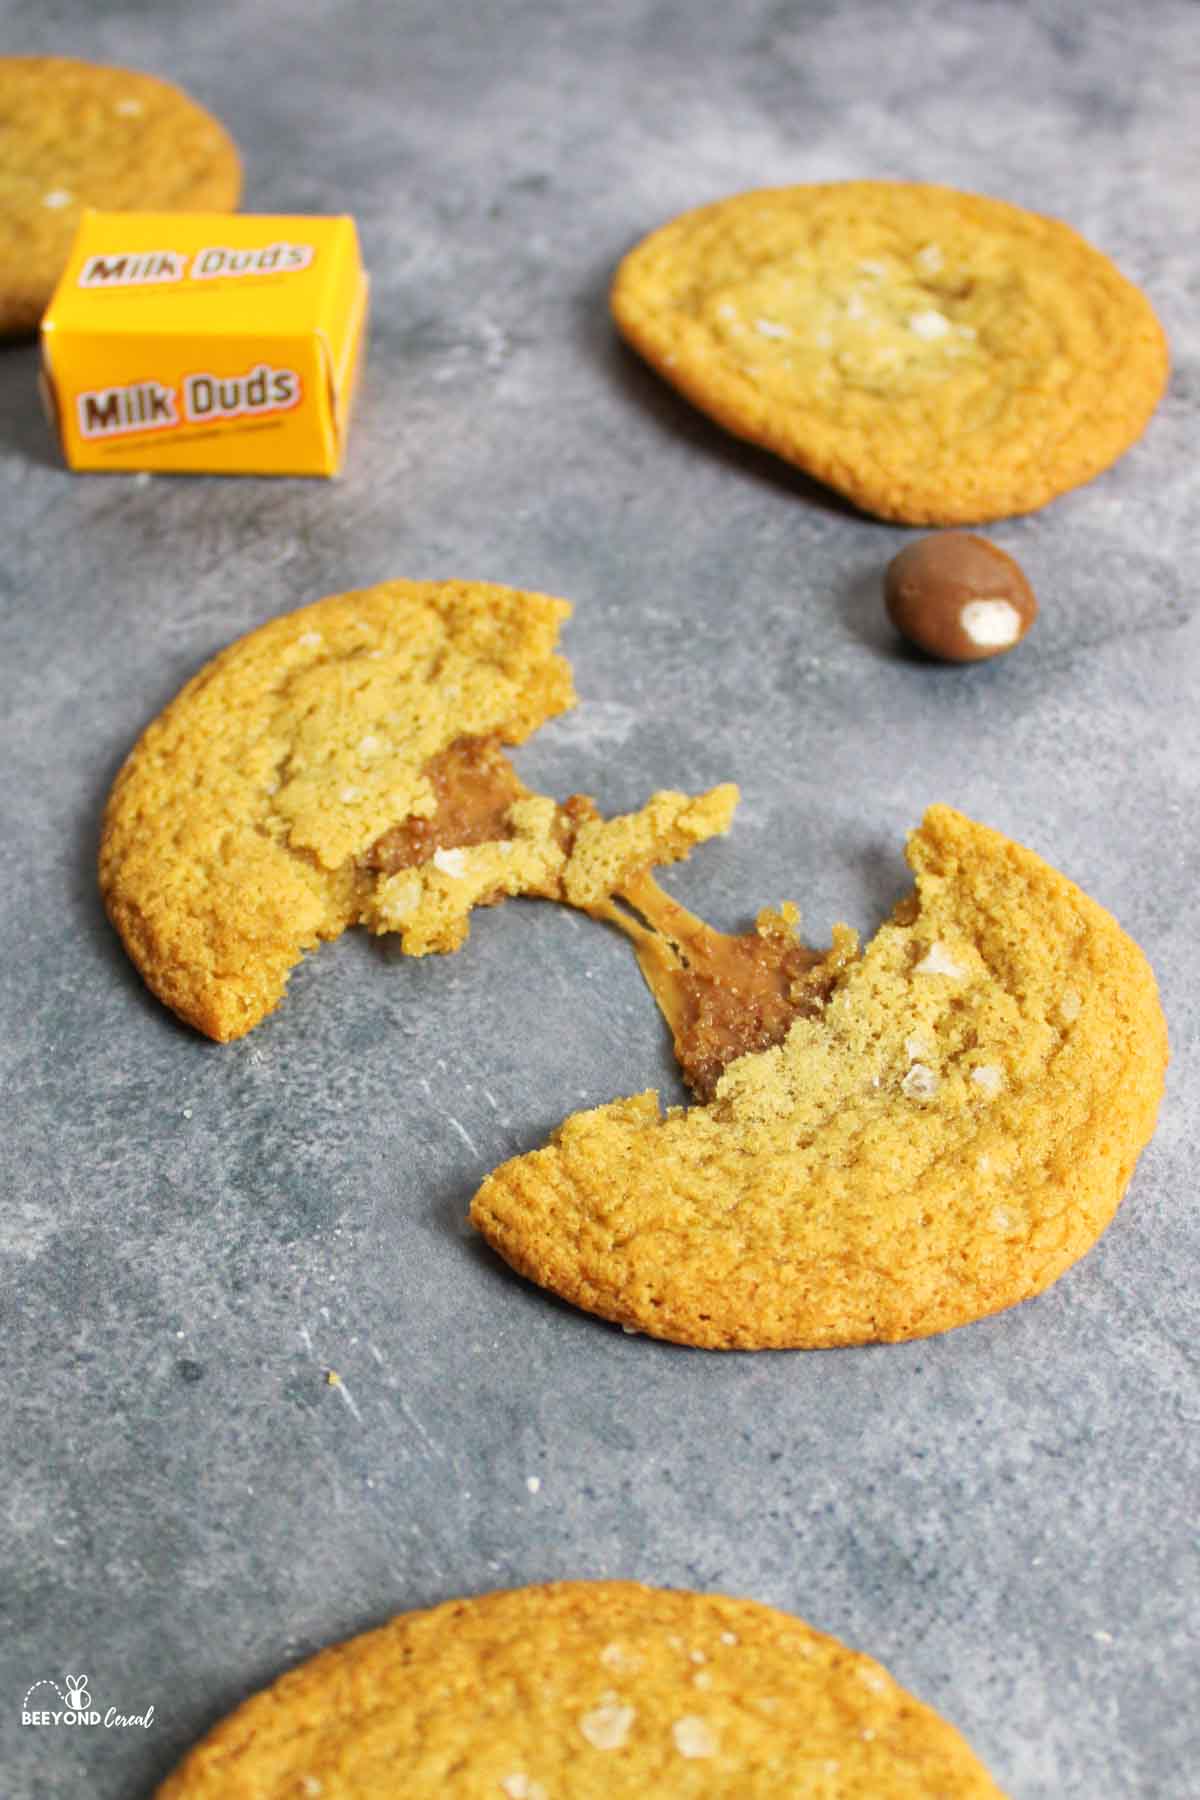 a broken milk dud cookie to show the chewy caramel inside.